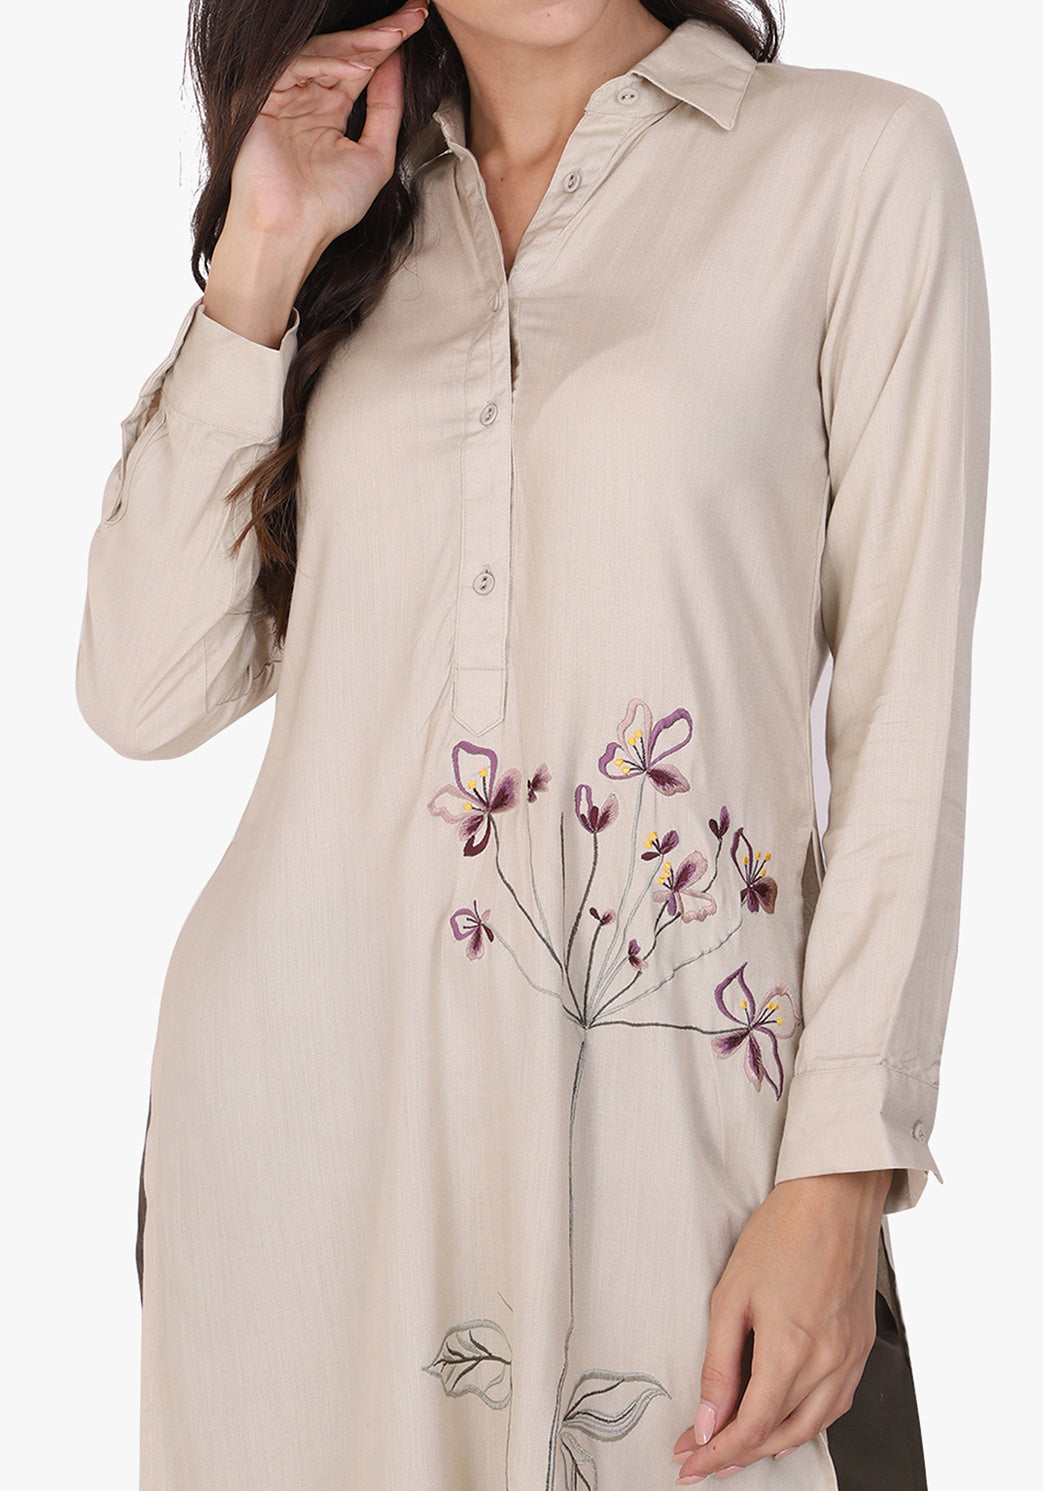 Statement Embroidered After Glow Floral Tunic